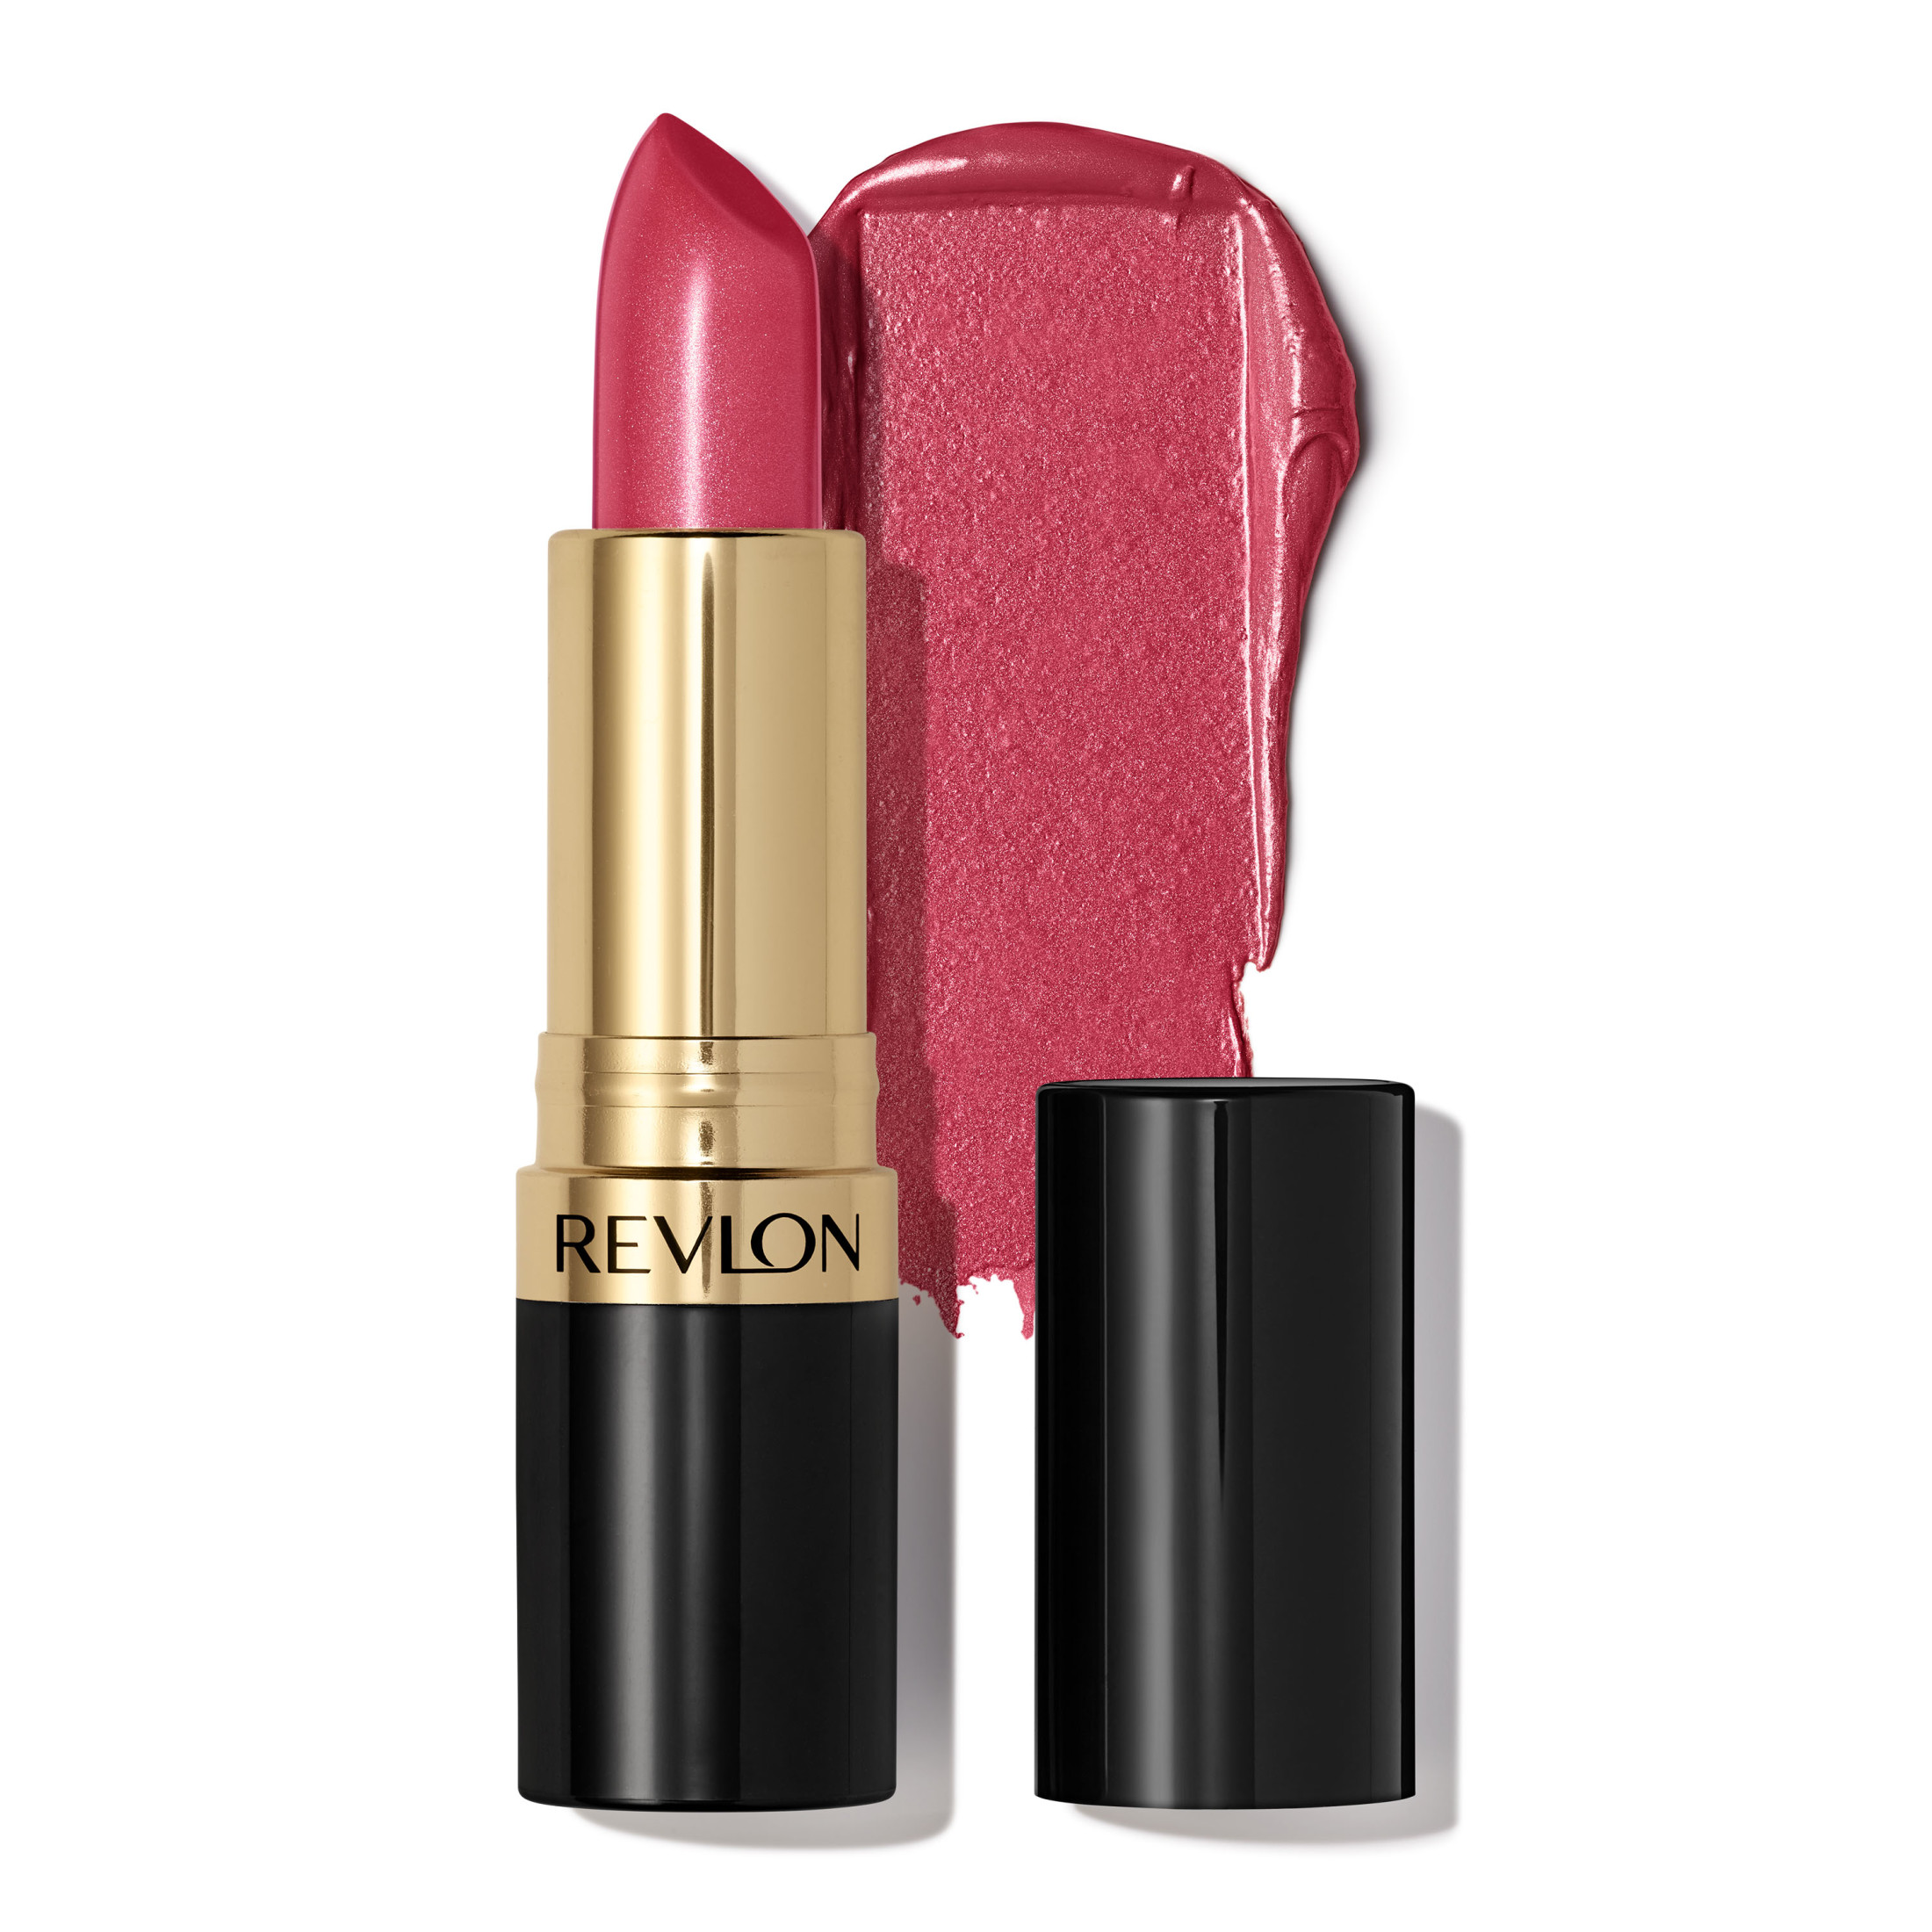 Revlon Super Lustrous Pearl Lipstick, Creamy Formula, 520 Wine With Everything, 0.15 oz - image 1 of 10